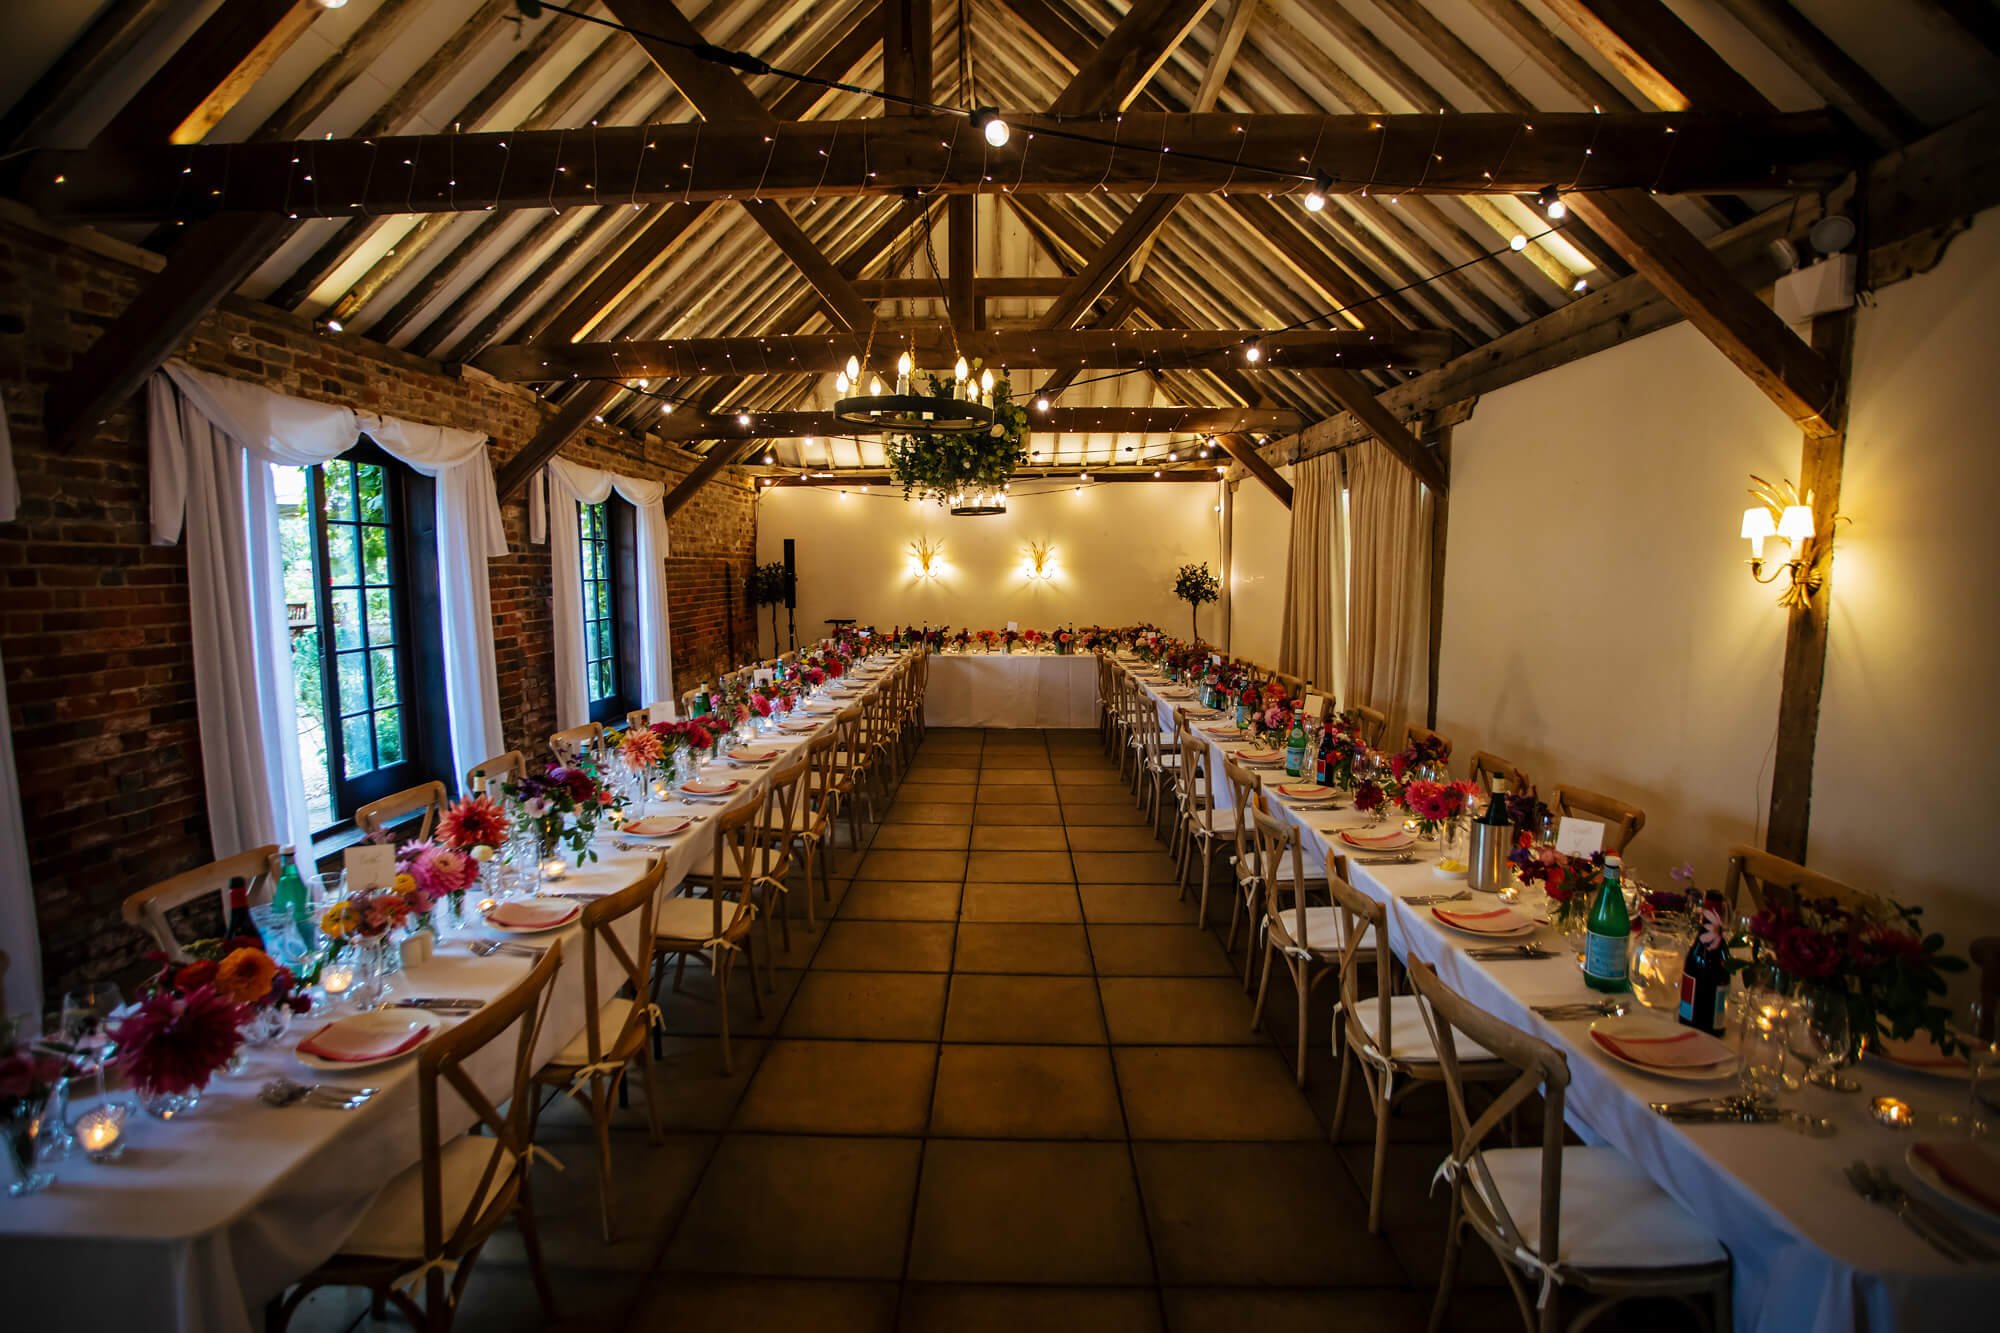 Tables set up for a wedding in Hertfordshire